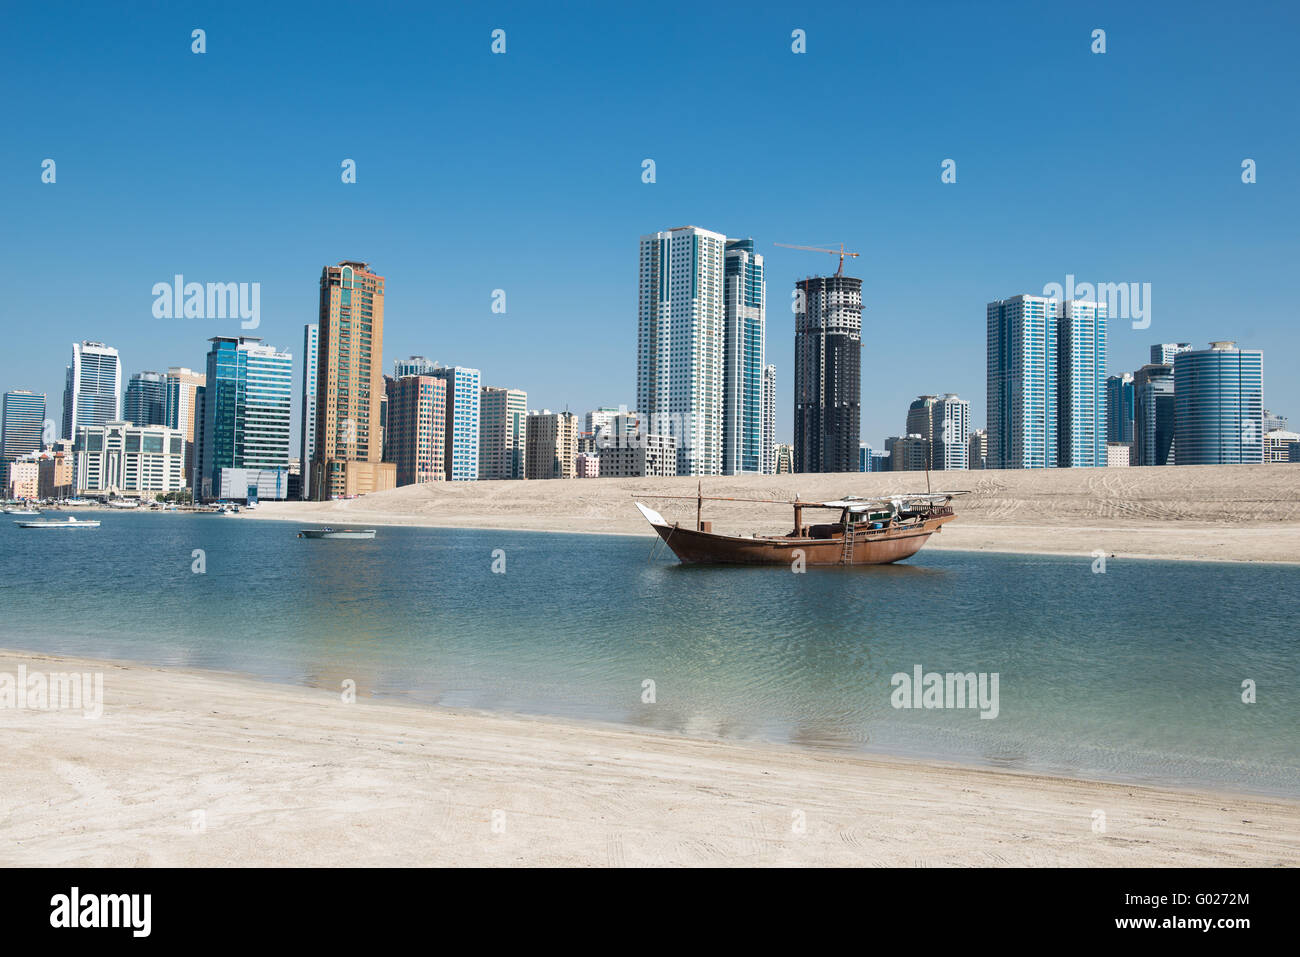 Traditional boat with modern skyline, Emirate of Sharjah, UAE. Stock Photo